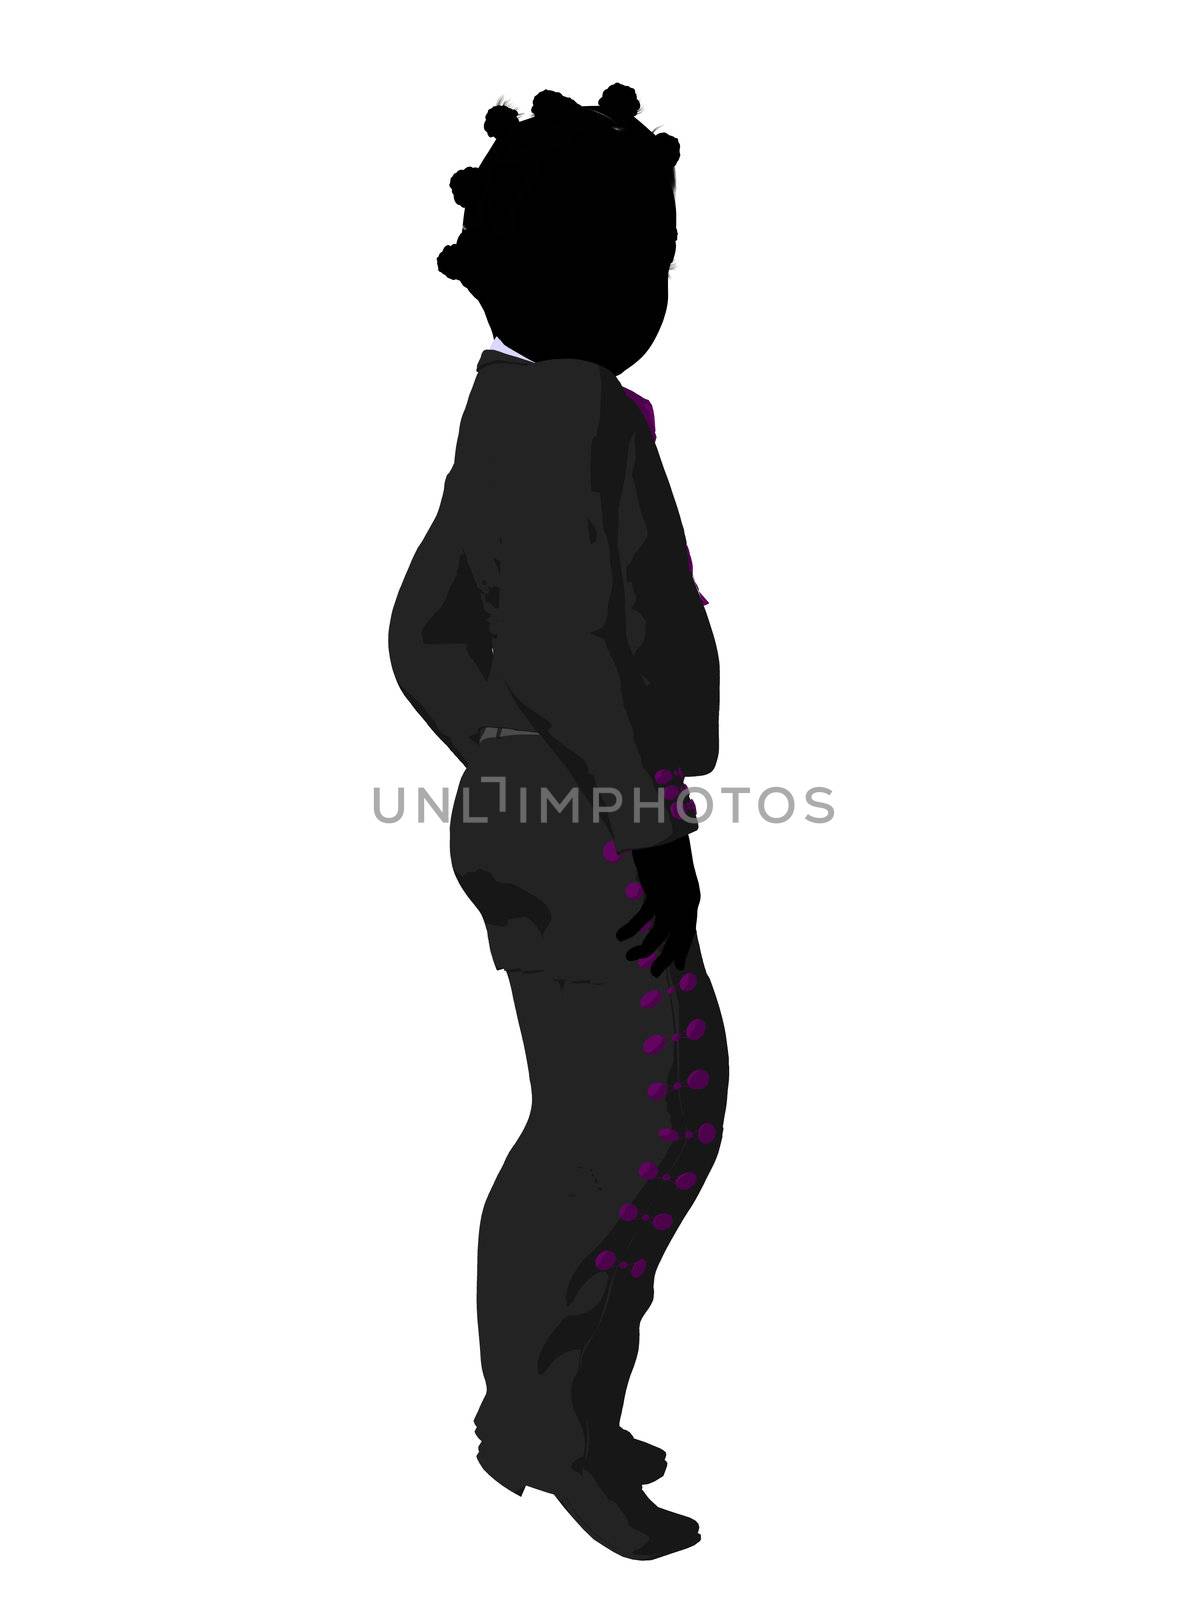 African american girl mariachi illustration silhouette illustration on a white background